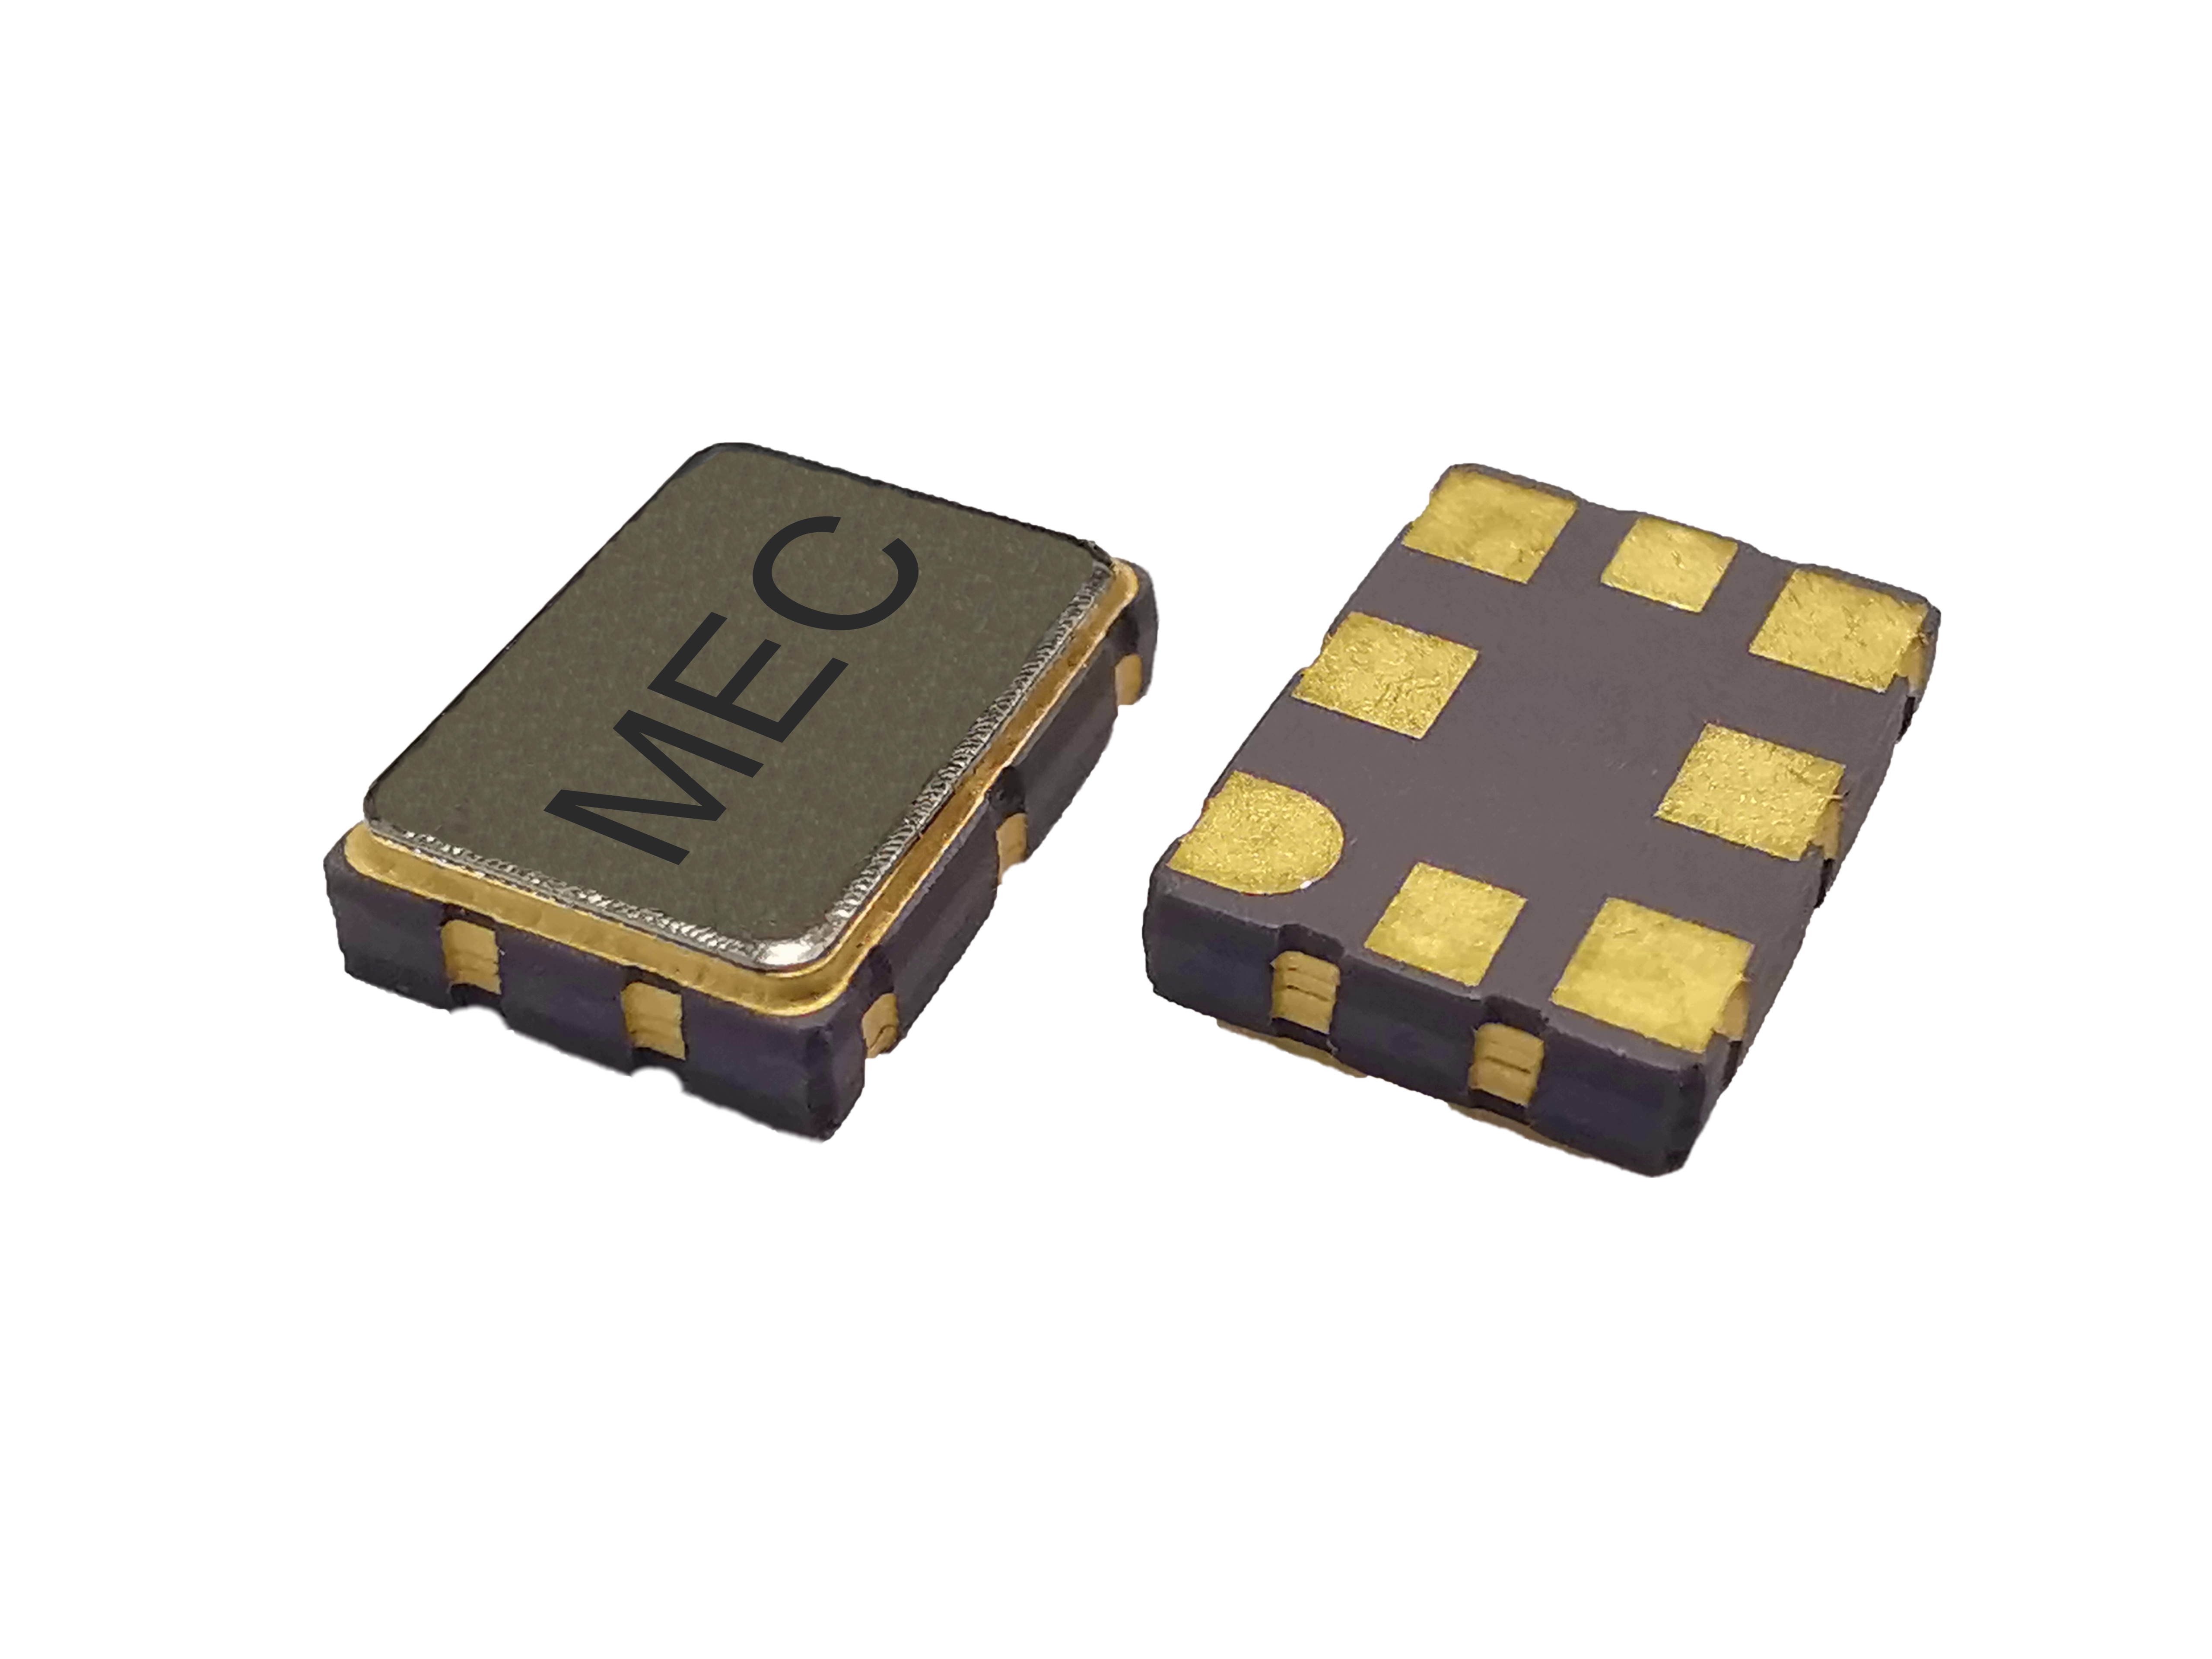 HPJF578 7050 2.5V Ultra Low Jitter Quick-turn Programmable Differential LVPECL SMD Crystal Oscillator